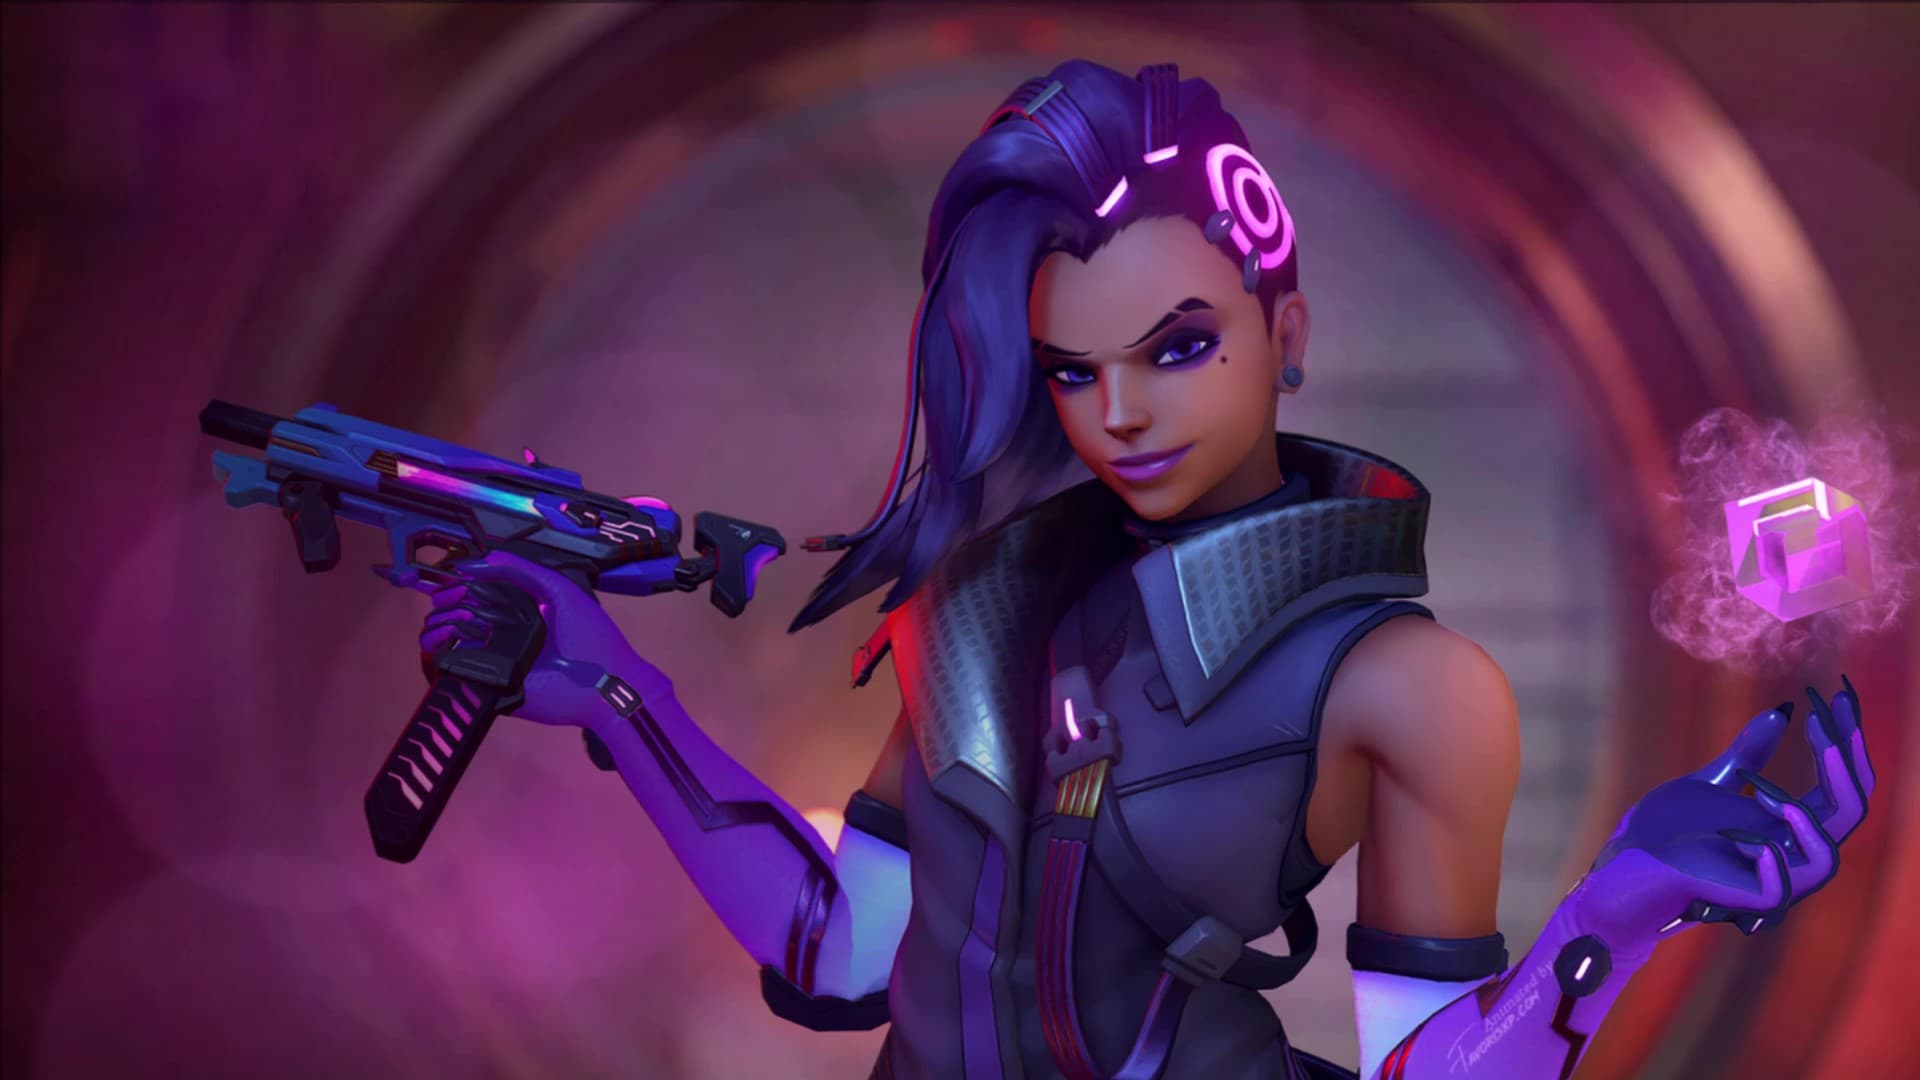 Overwatch 2 Sombra Animated Wallpaper For PC | by Favorisxp on DeviantArt